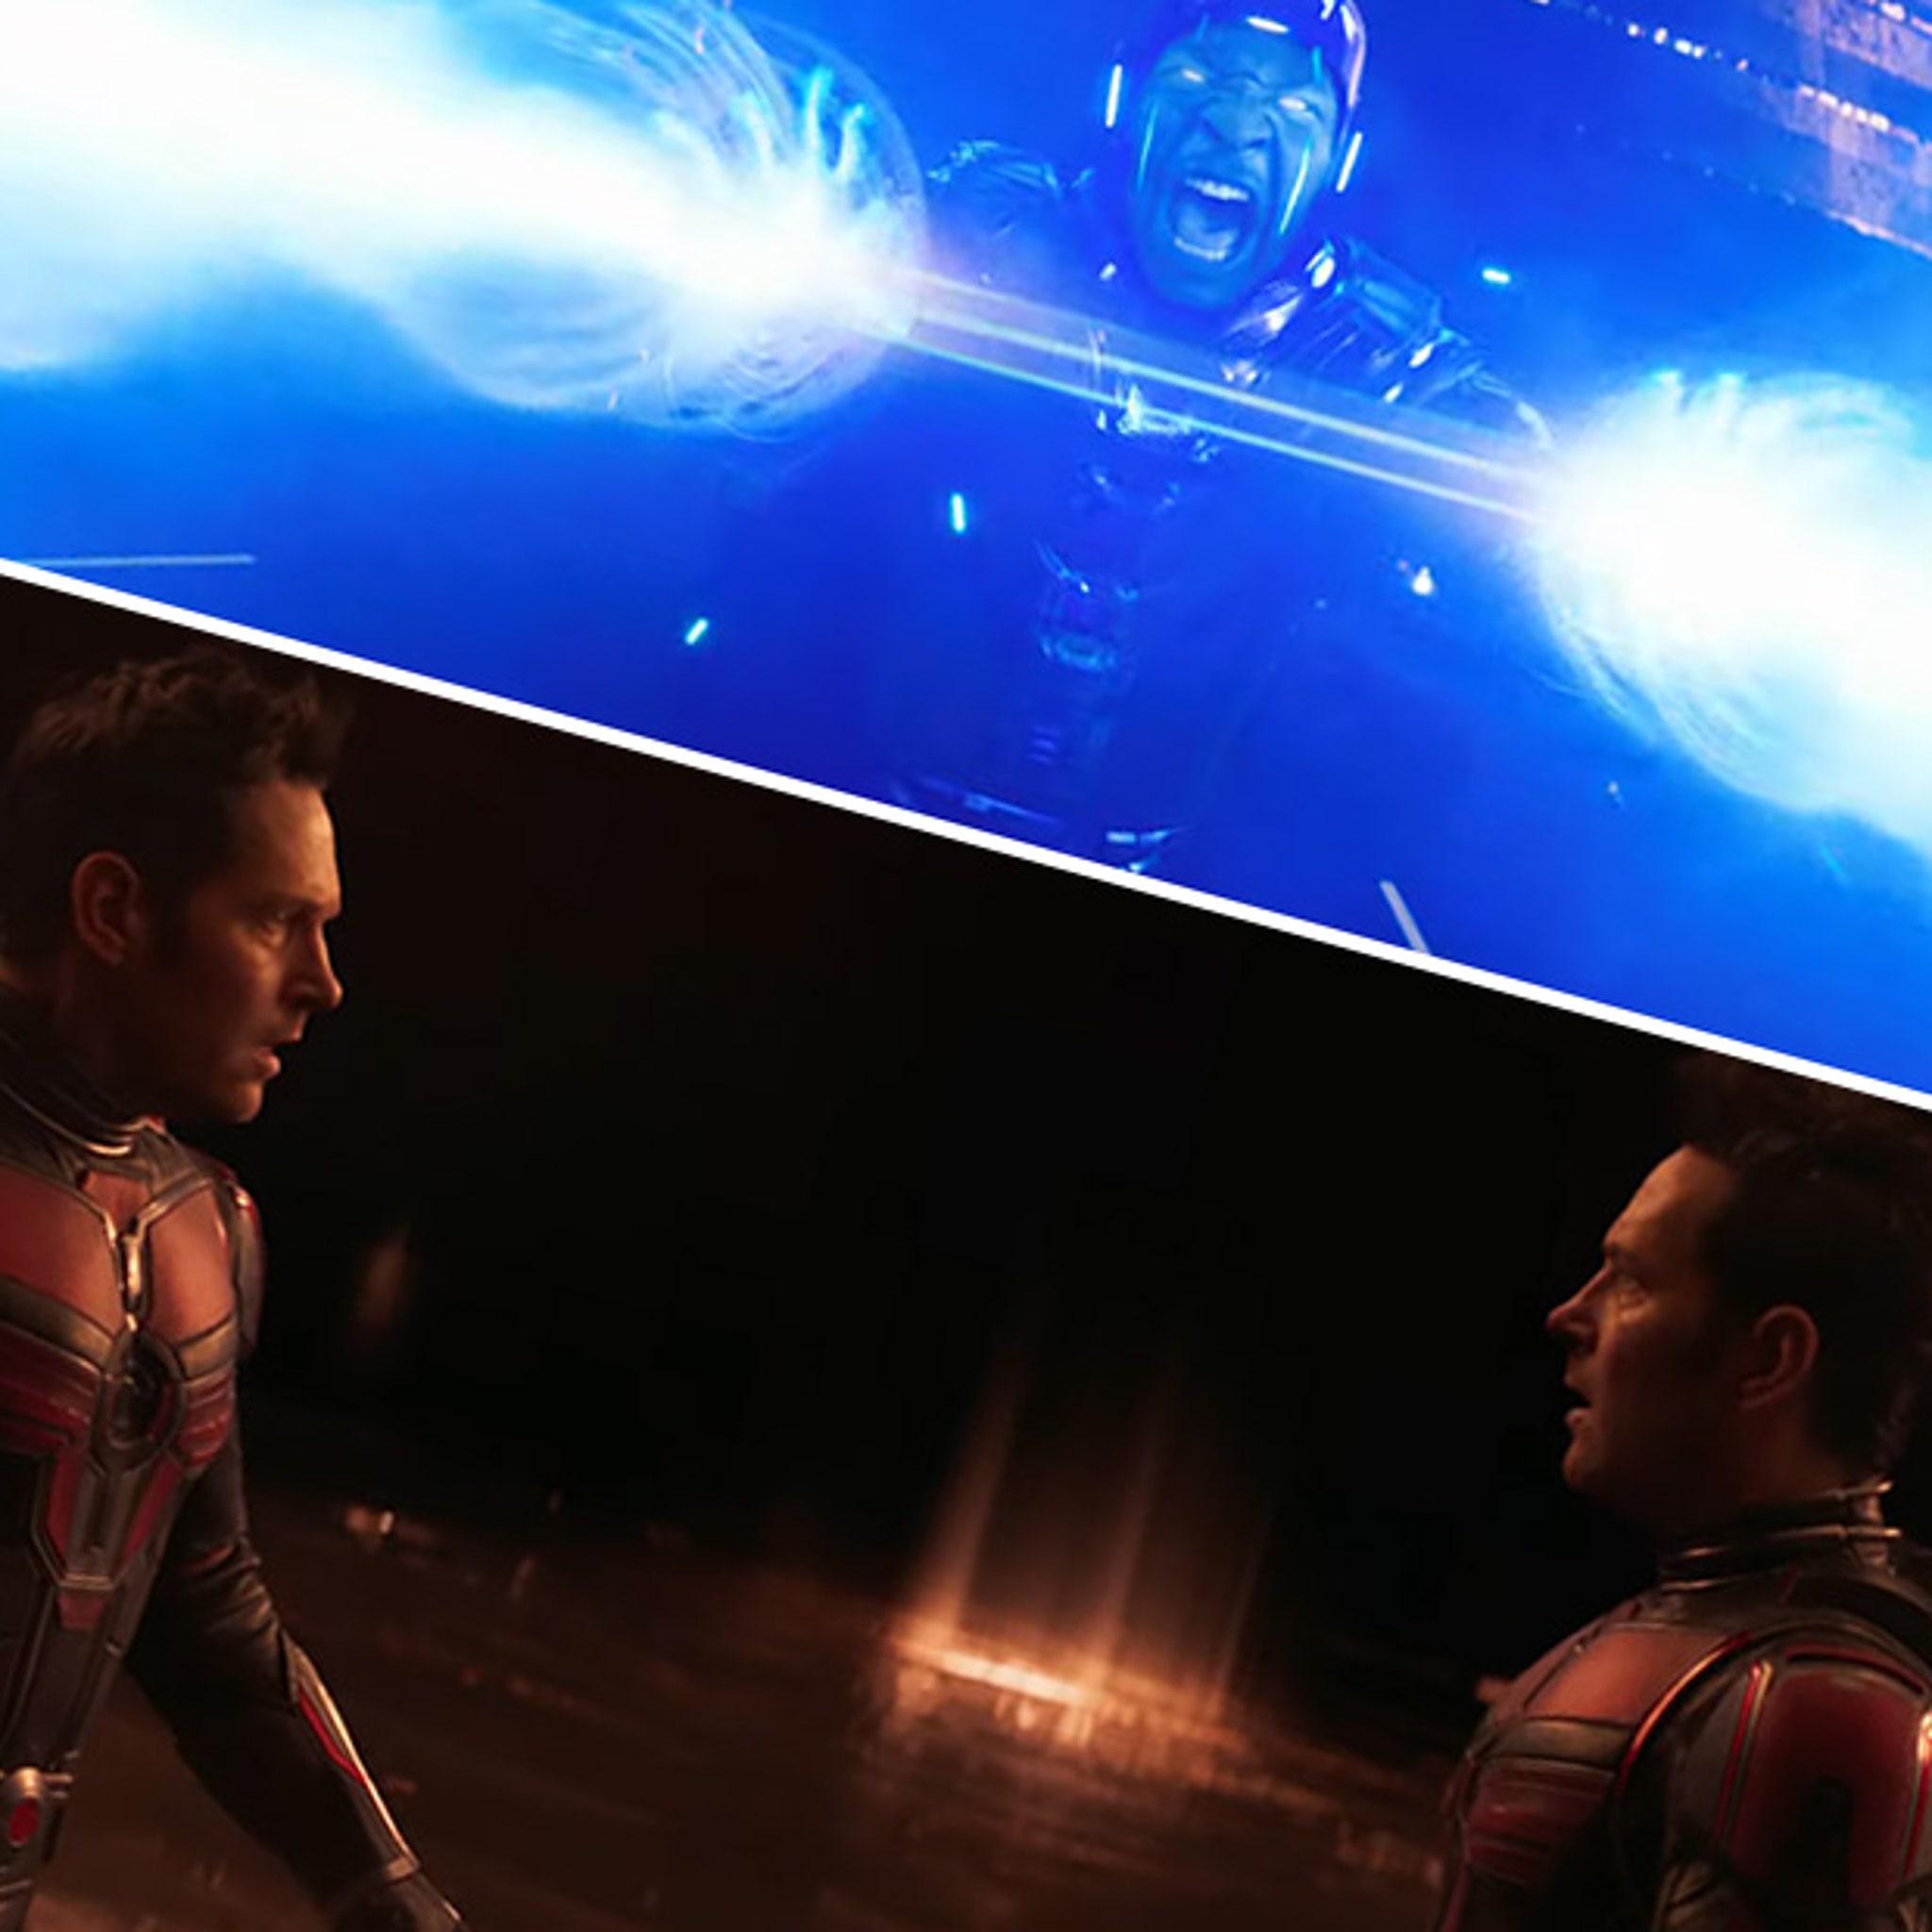 The 'Ant-Man and Wasp: Quantumania' Trailer Puts Kang the